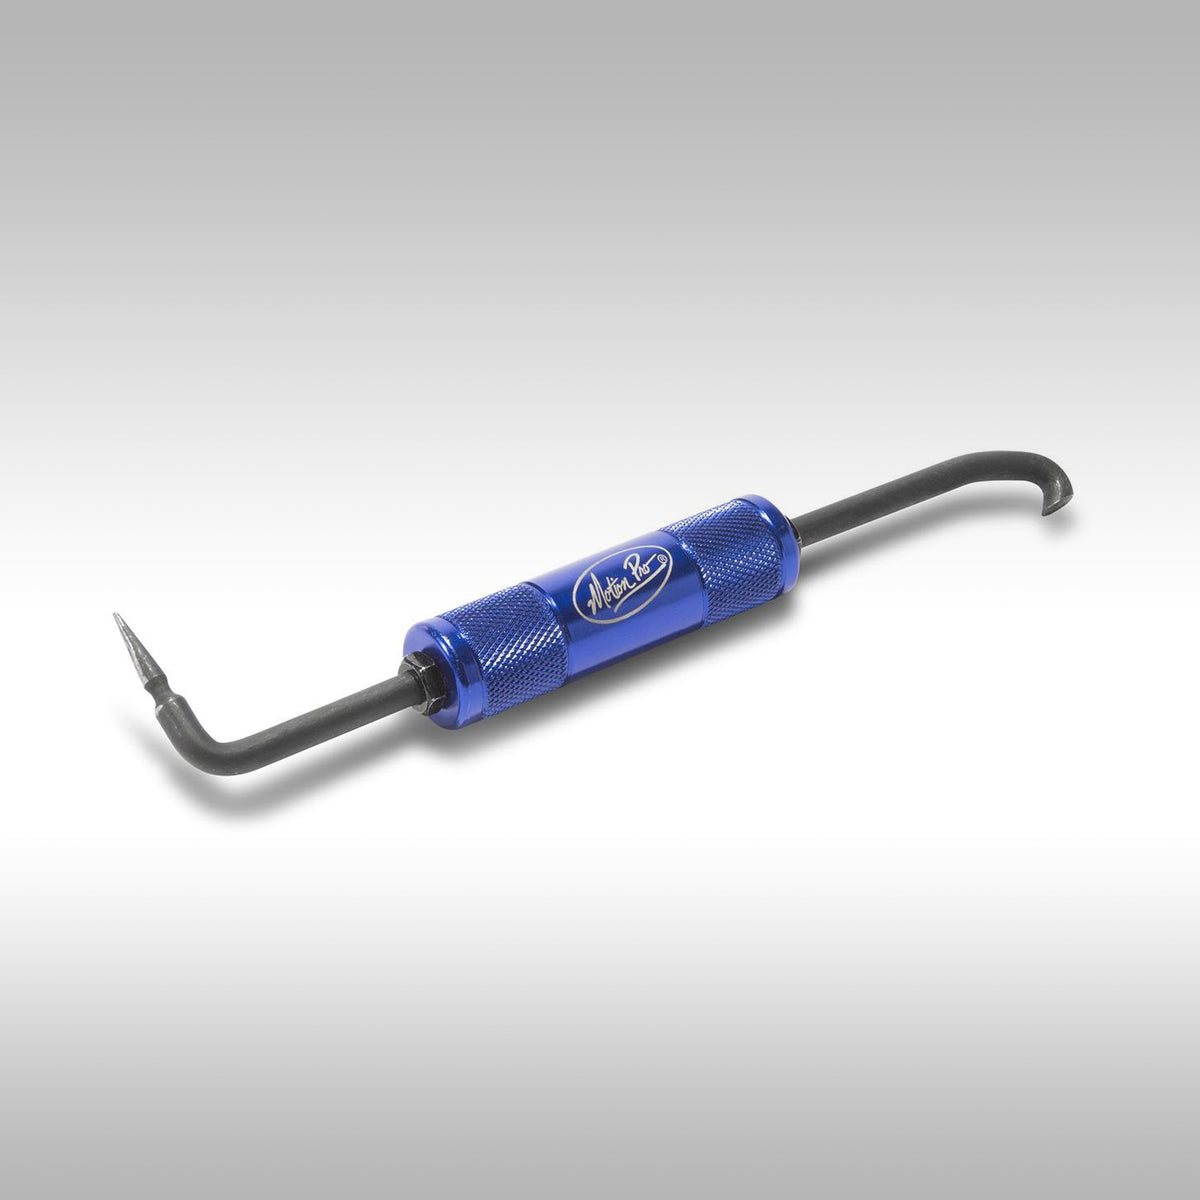 MOTION PRO - HOSE REMOVAL TOOL